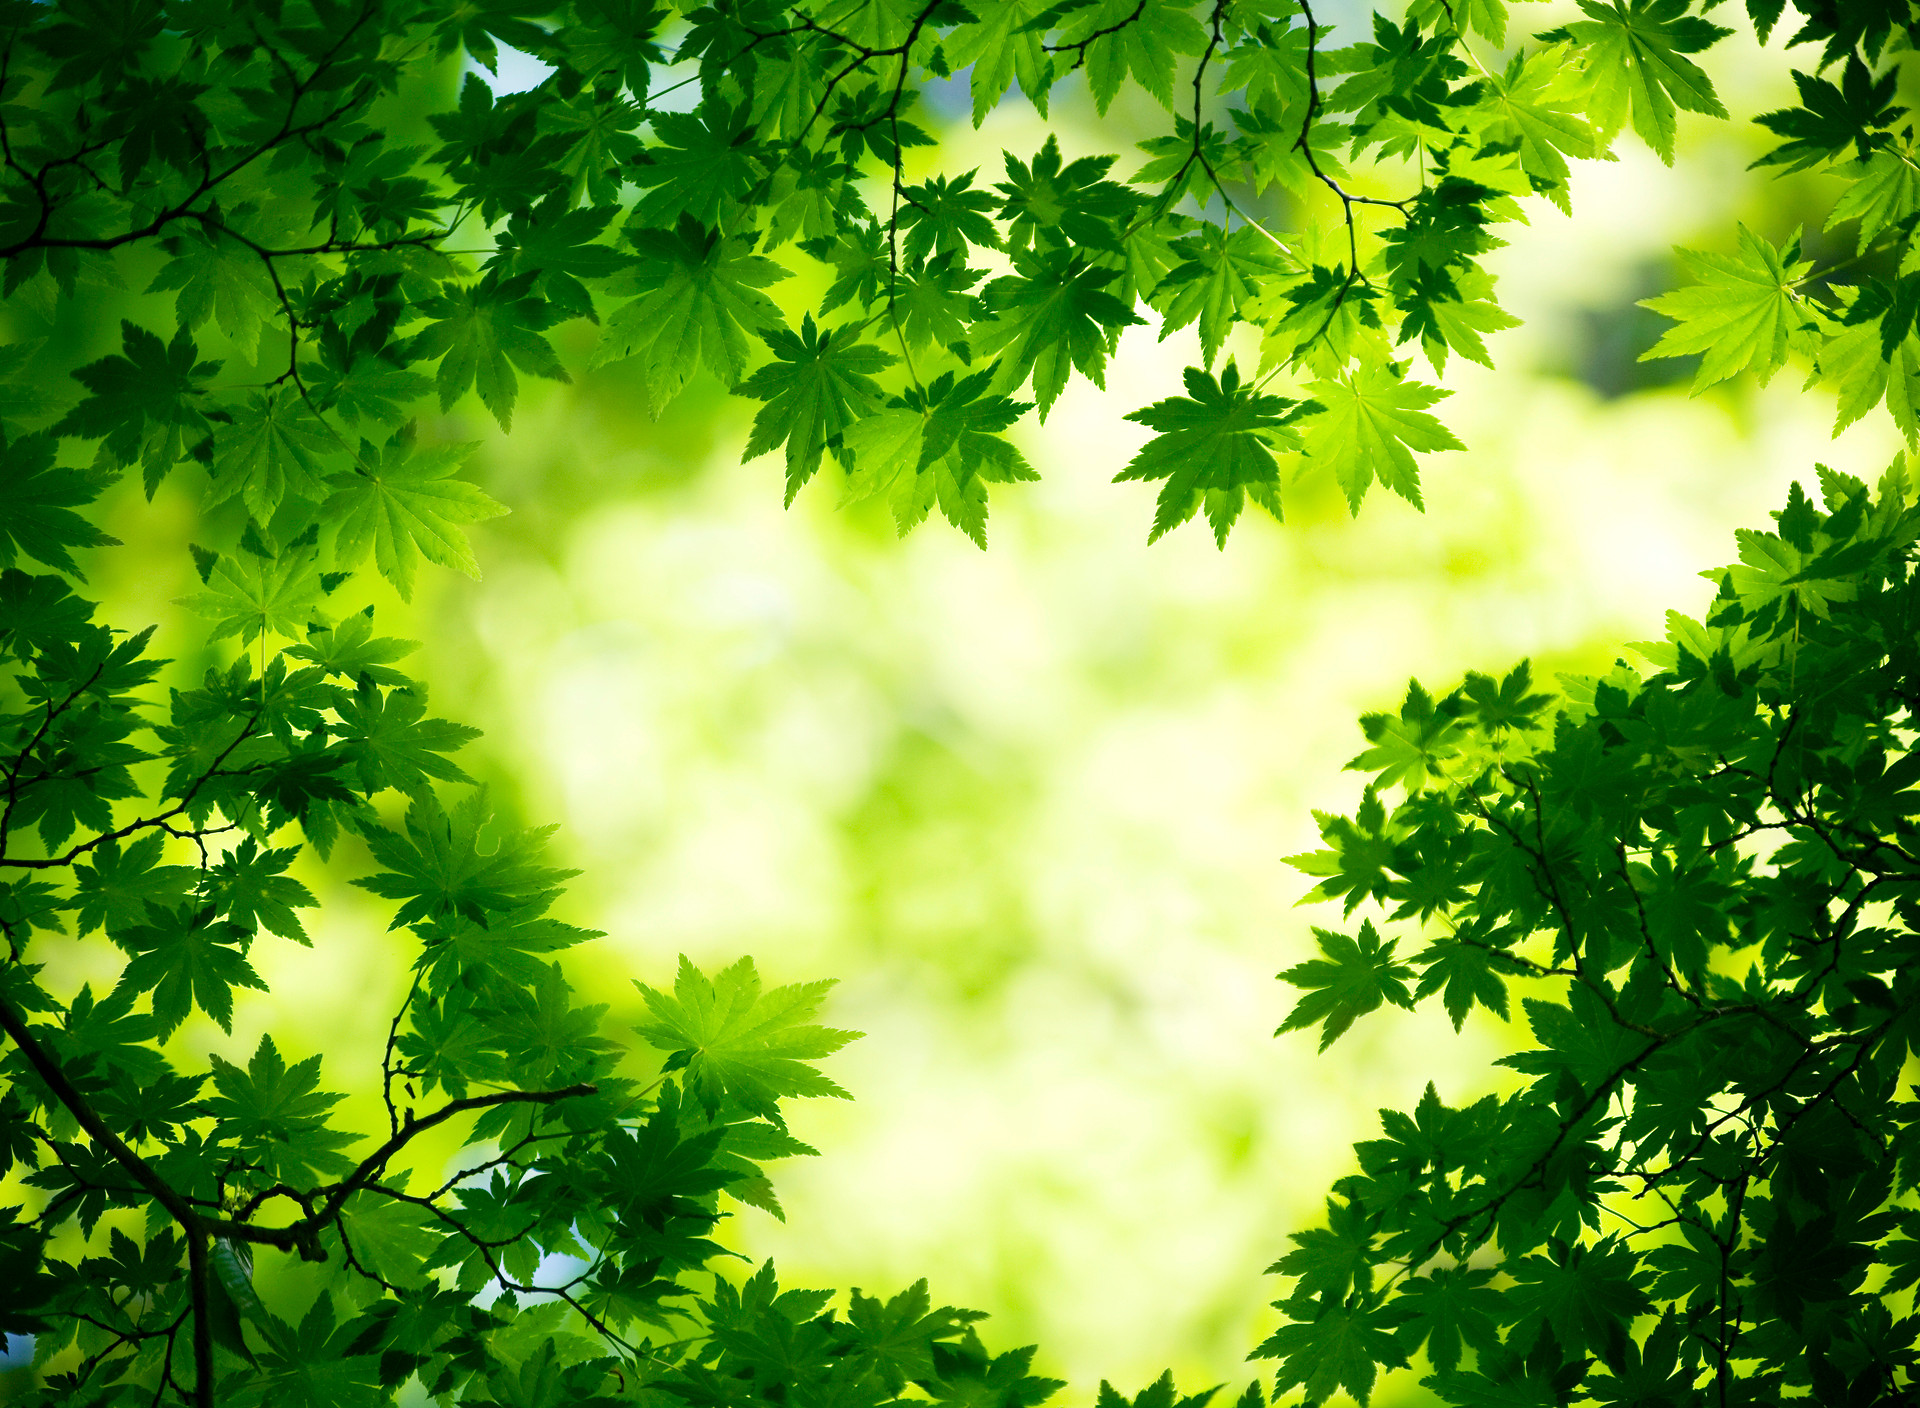 Share - Green Tree Backgrounds , HD Wallpaper & Backgrounds